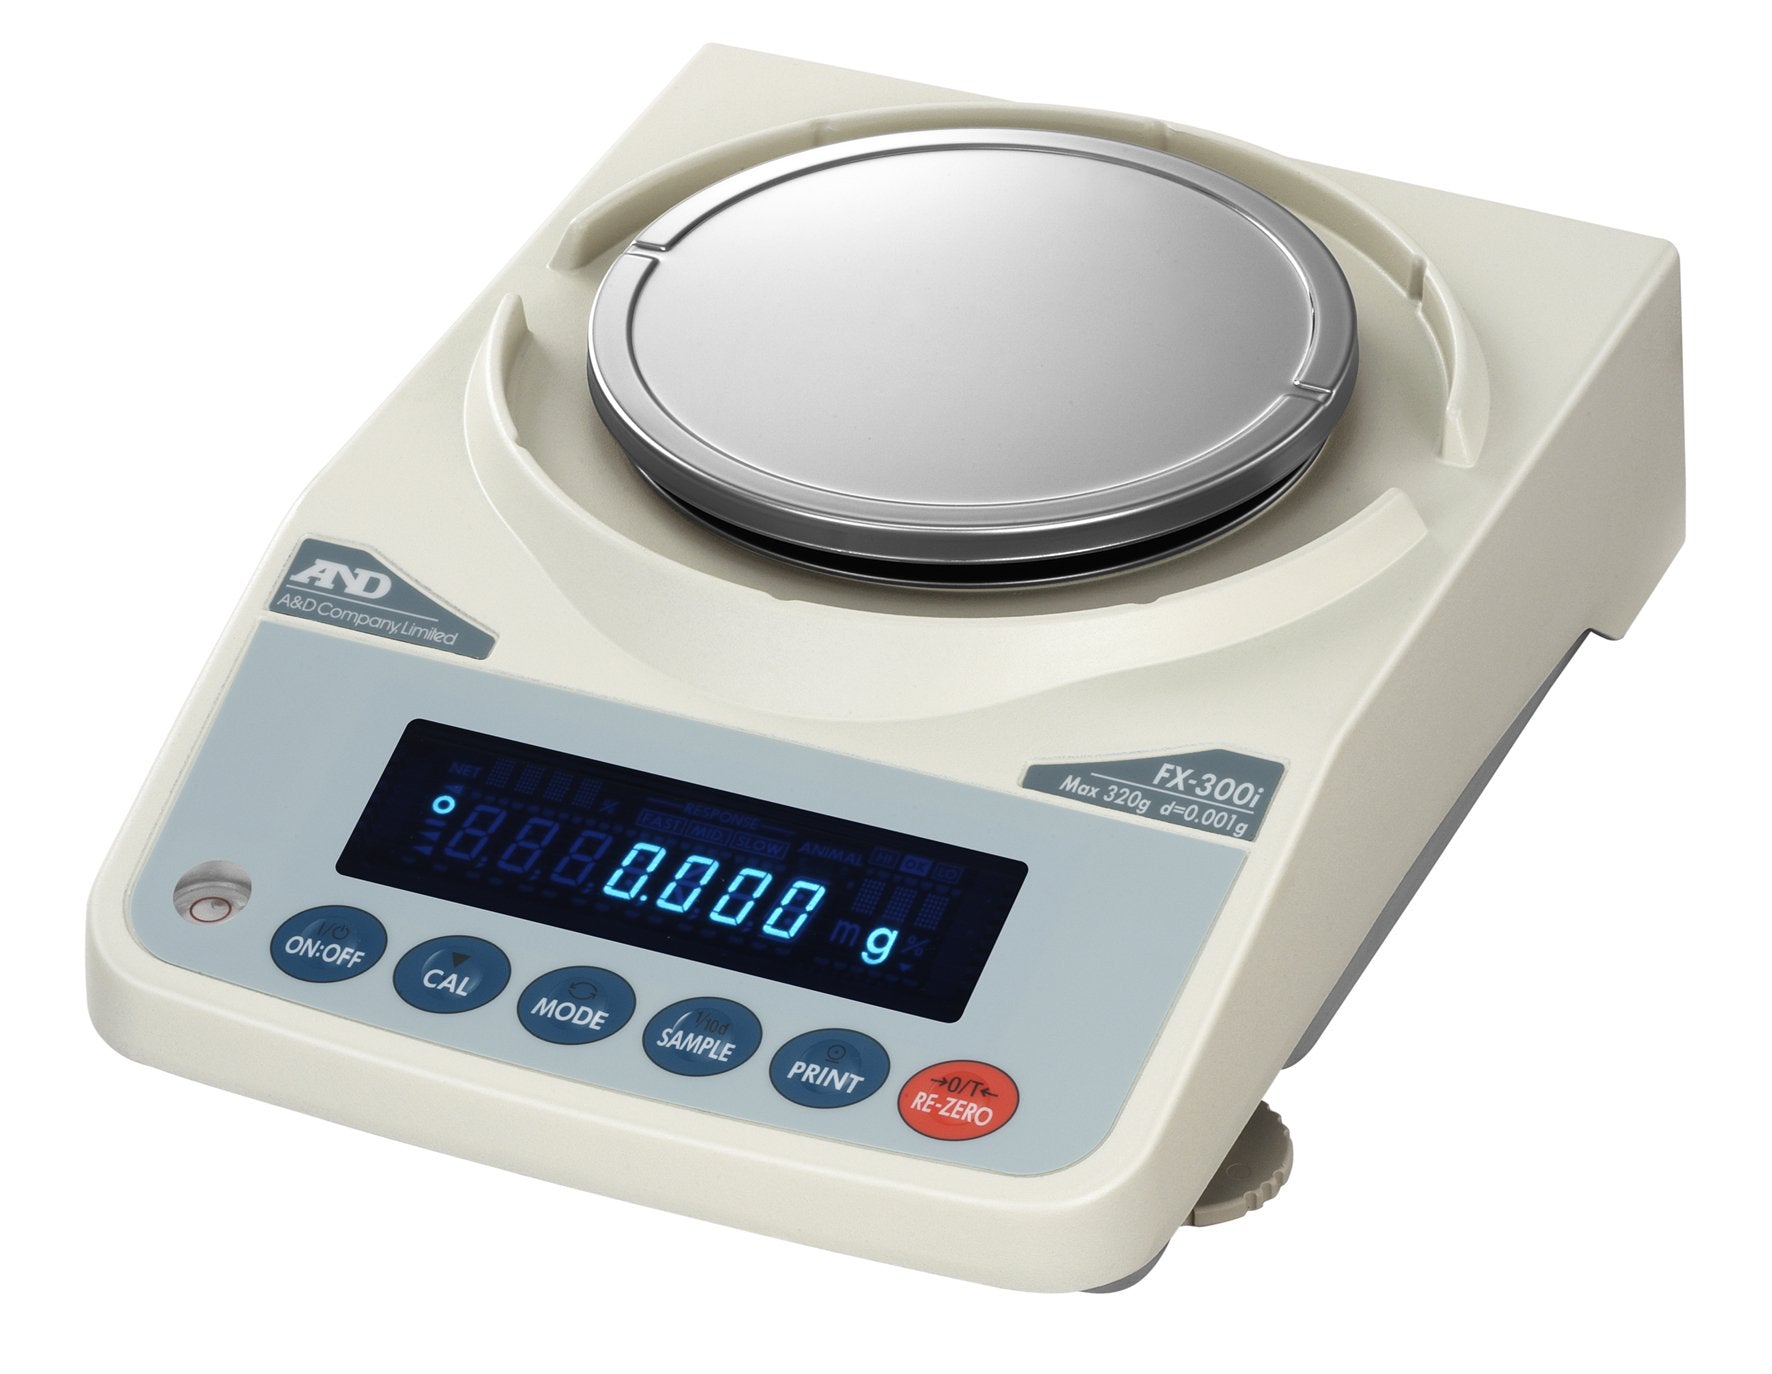 AND Weighing FX-200iNC Precision Balance